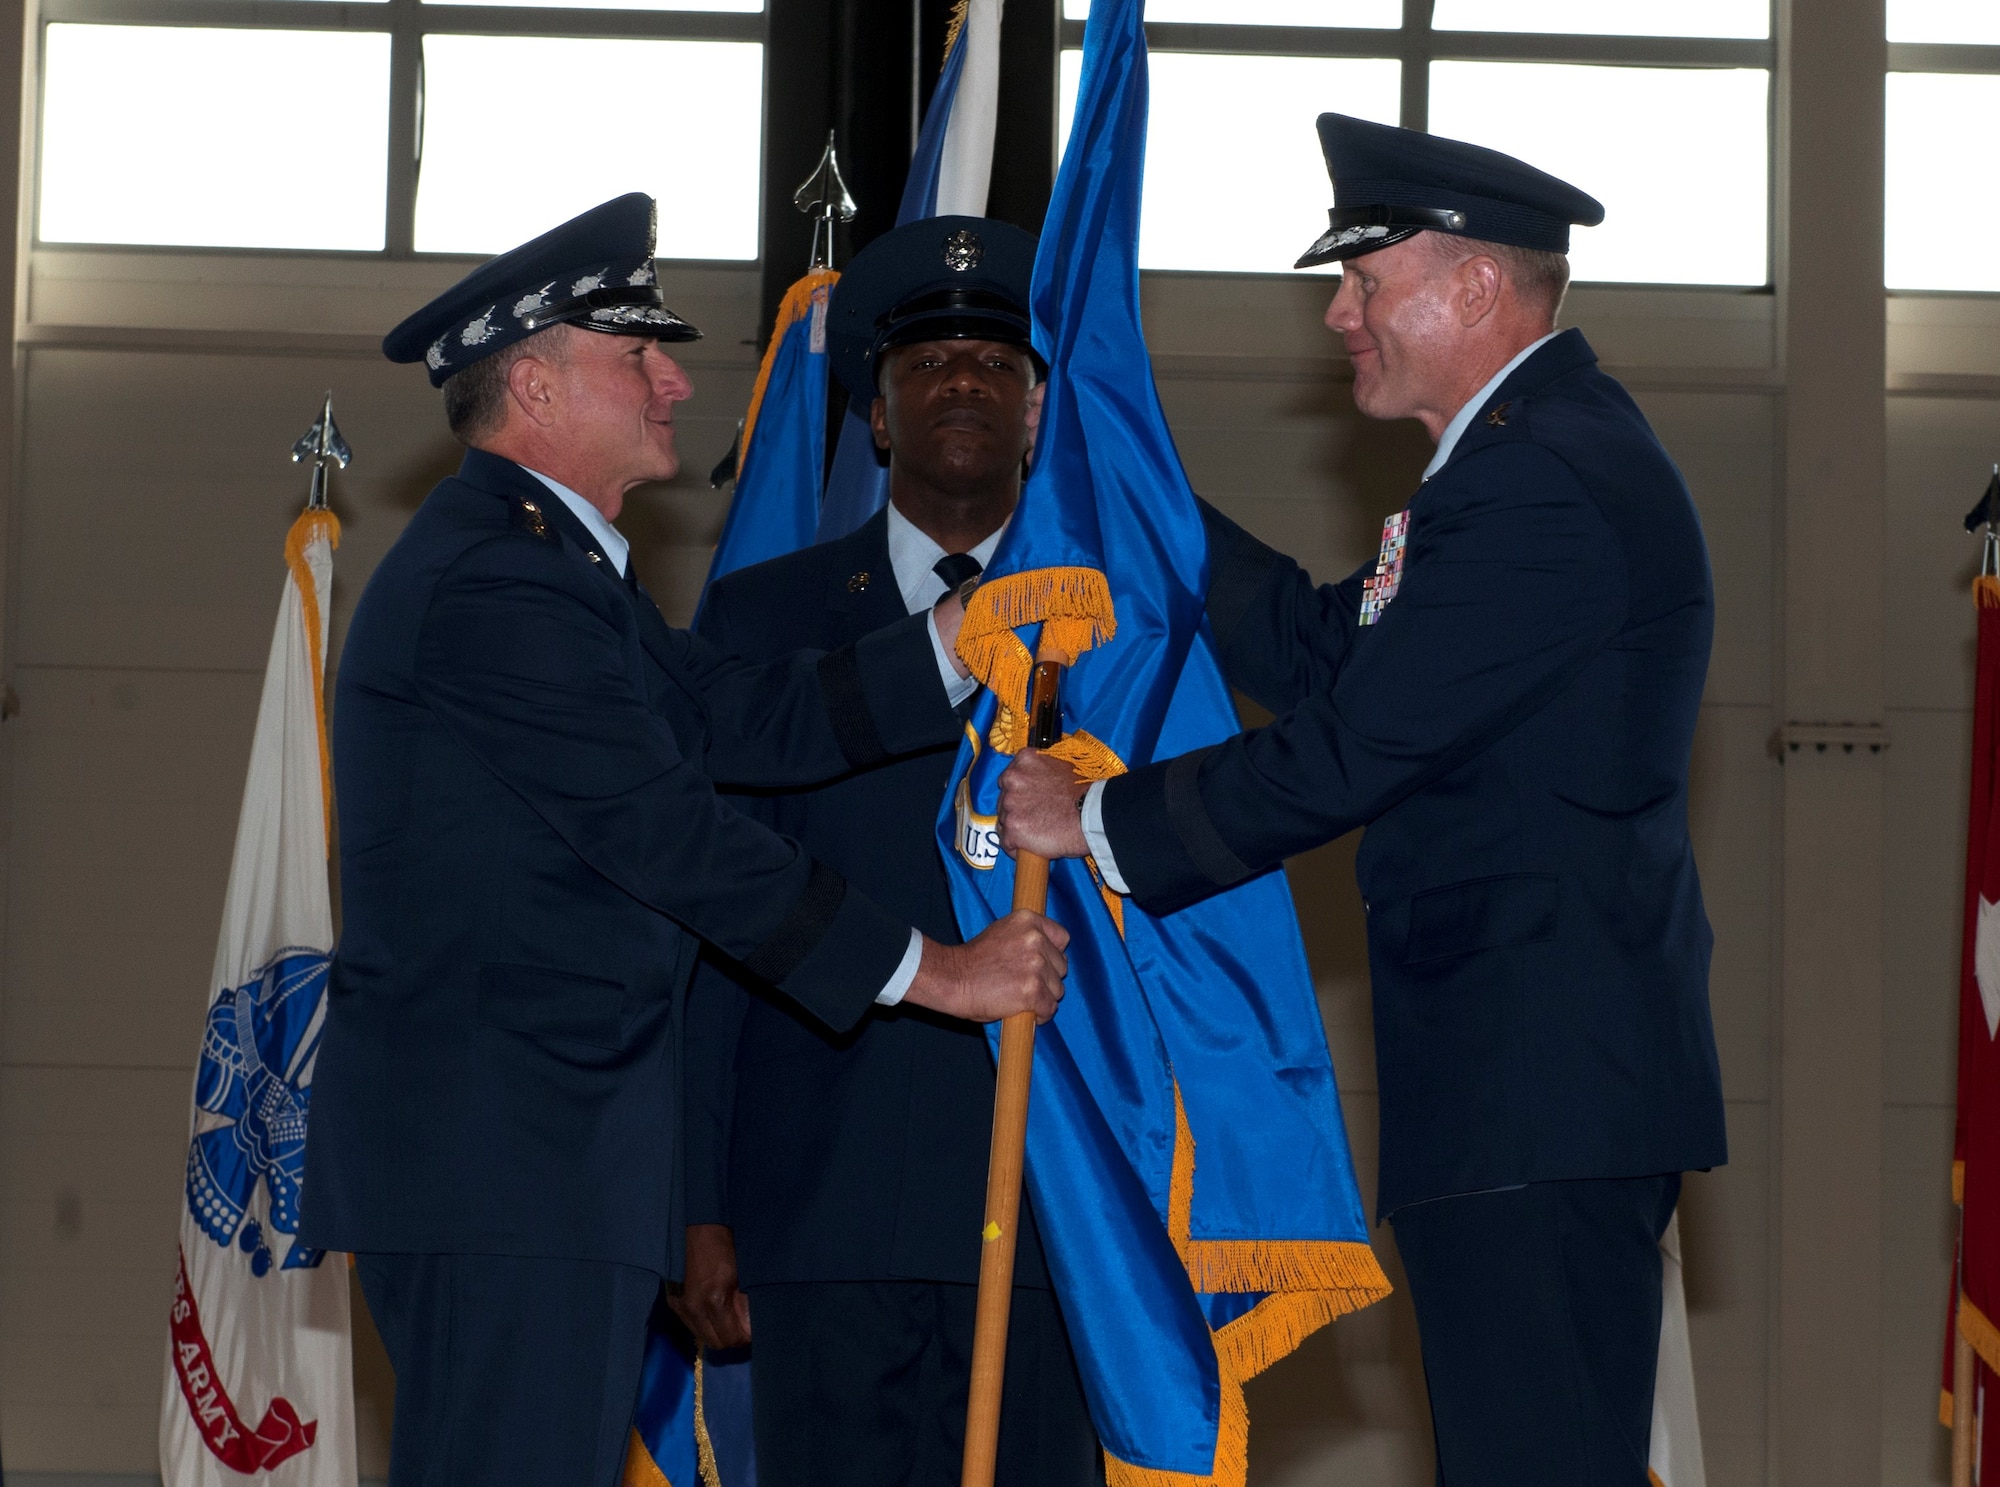 Air Force Chief of Staff Gen. David Goldfein presents Gen. Tod Wolters the U.S. Air Forces in Europe and Air Forces Africa guidon during a change of command ceremony at Ramstein Air Base, Germany, Aug. 11, 2016. Wolters is coming from an assignment as the director of operations on the joint staff at the Pentagon. USAFE-AFAFRICA executes the Air Force, U.S. European Command and U.S. Arica Command missions with forward-based airpower and infrastructure to conduct and enable theater and global operations.  (U.S. Air Force photo/Airman 1st Class Tryphena Mayhugh)